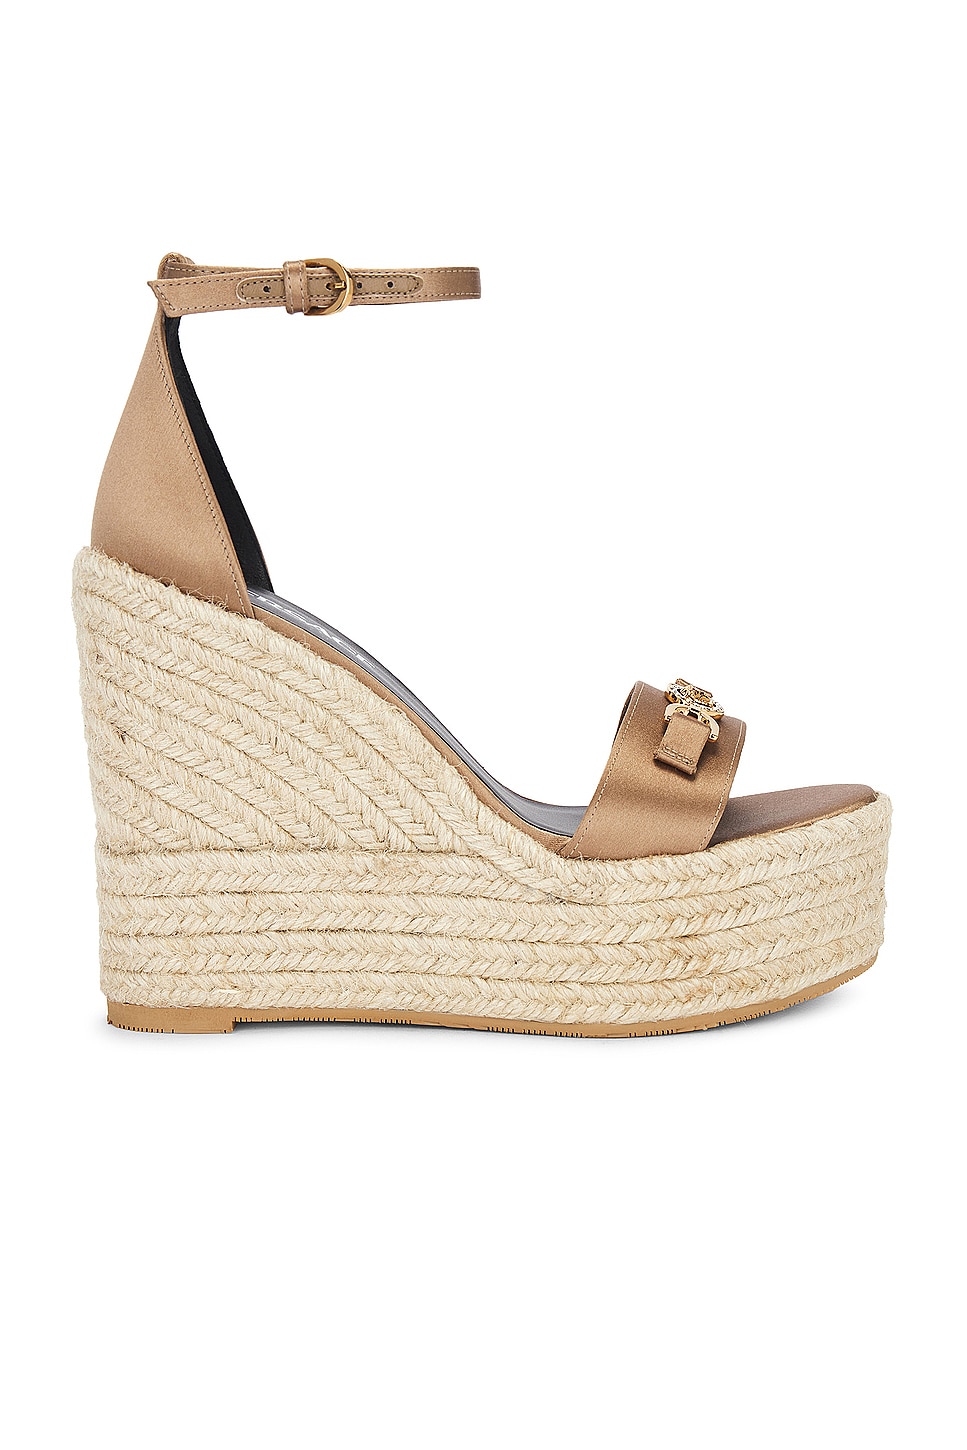 Image 1 of VERSACE Fabric Wedge Espadrille Sandal in Camel